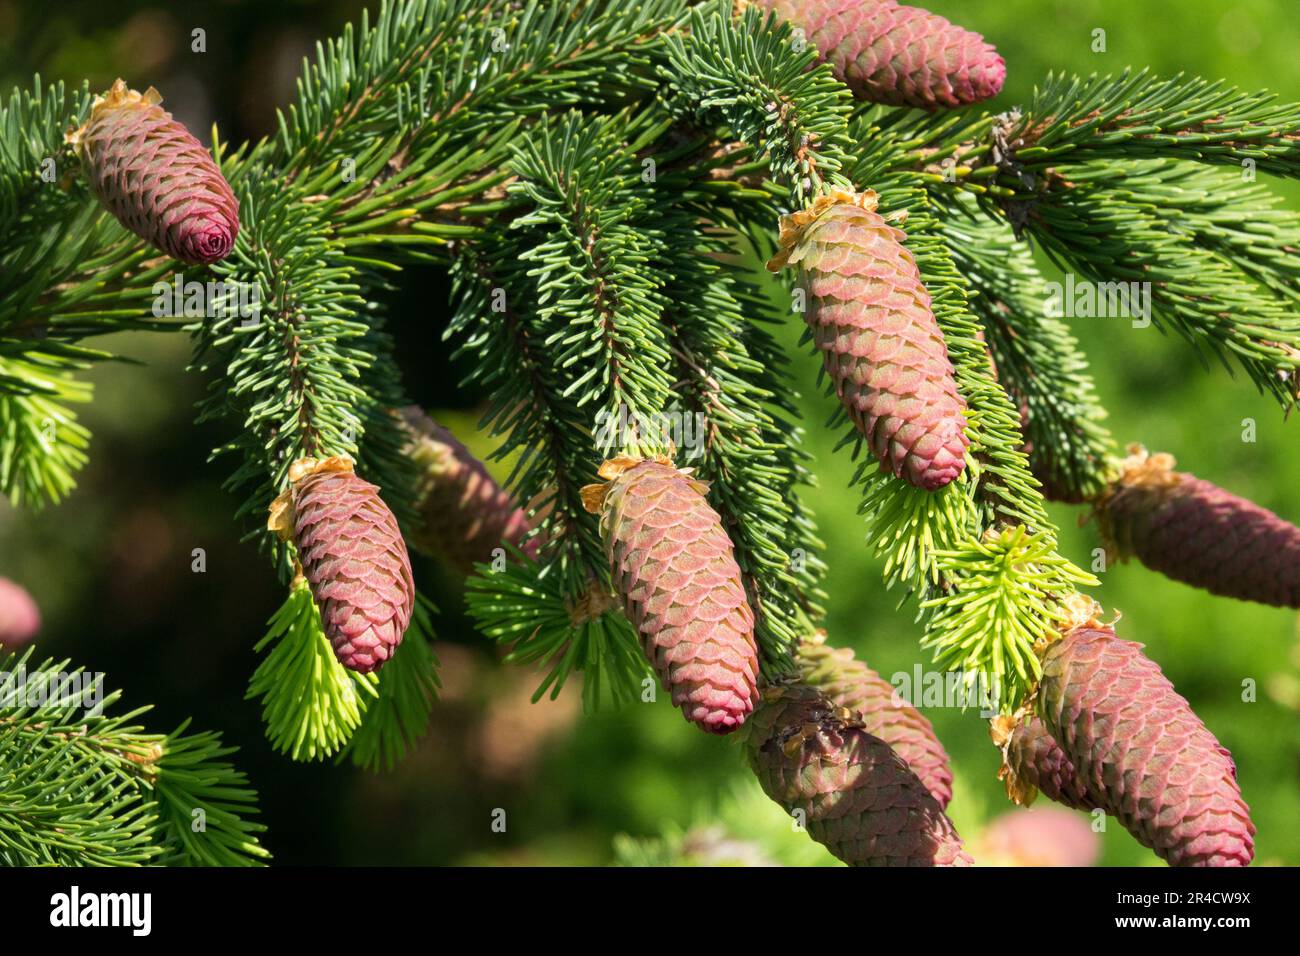 Norway spruce, Cones, Twigs, Spruce, Spring, Shoots Cones on ends of branches Stock Photo